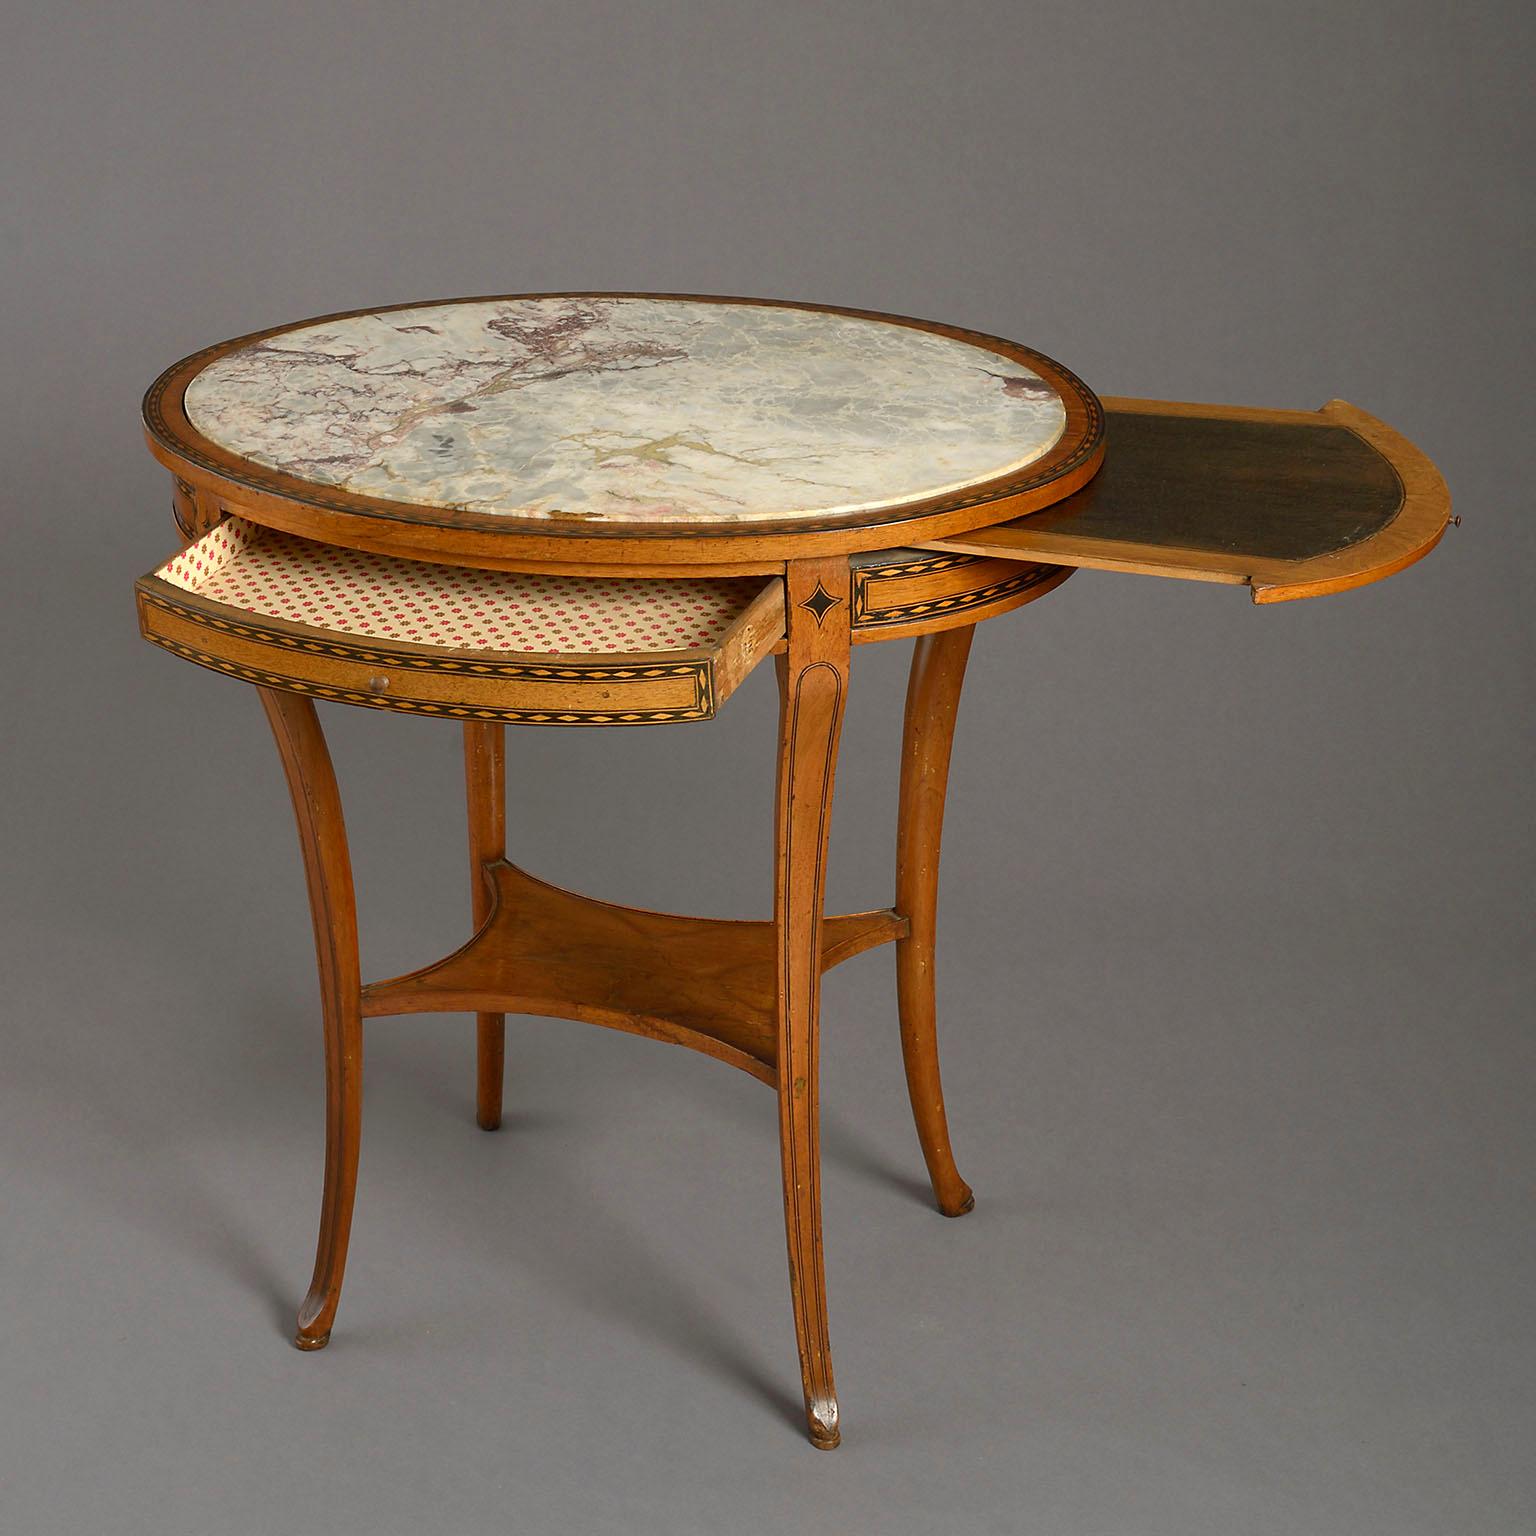 Neoclassical Early 19th Century Marble-Topped Centre Table